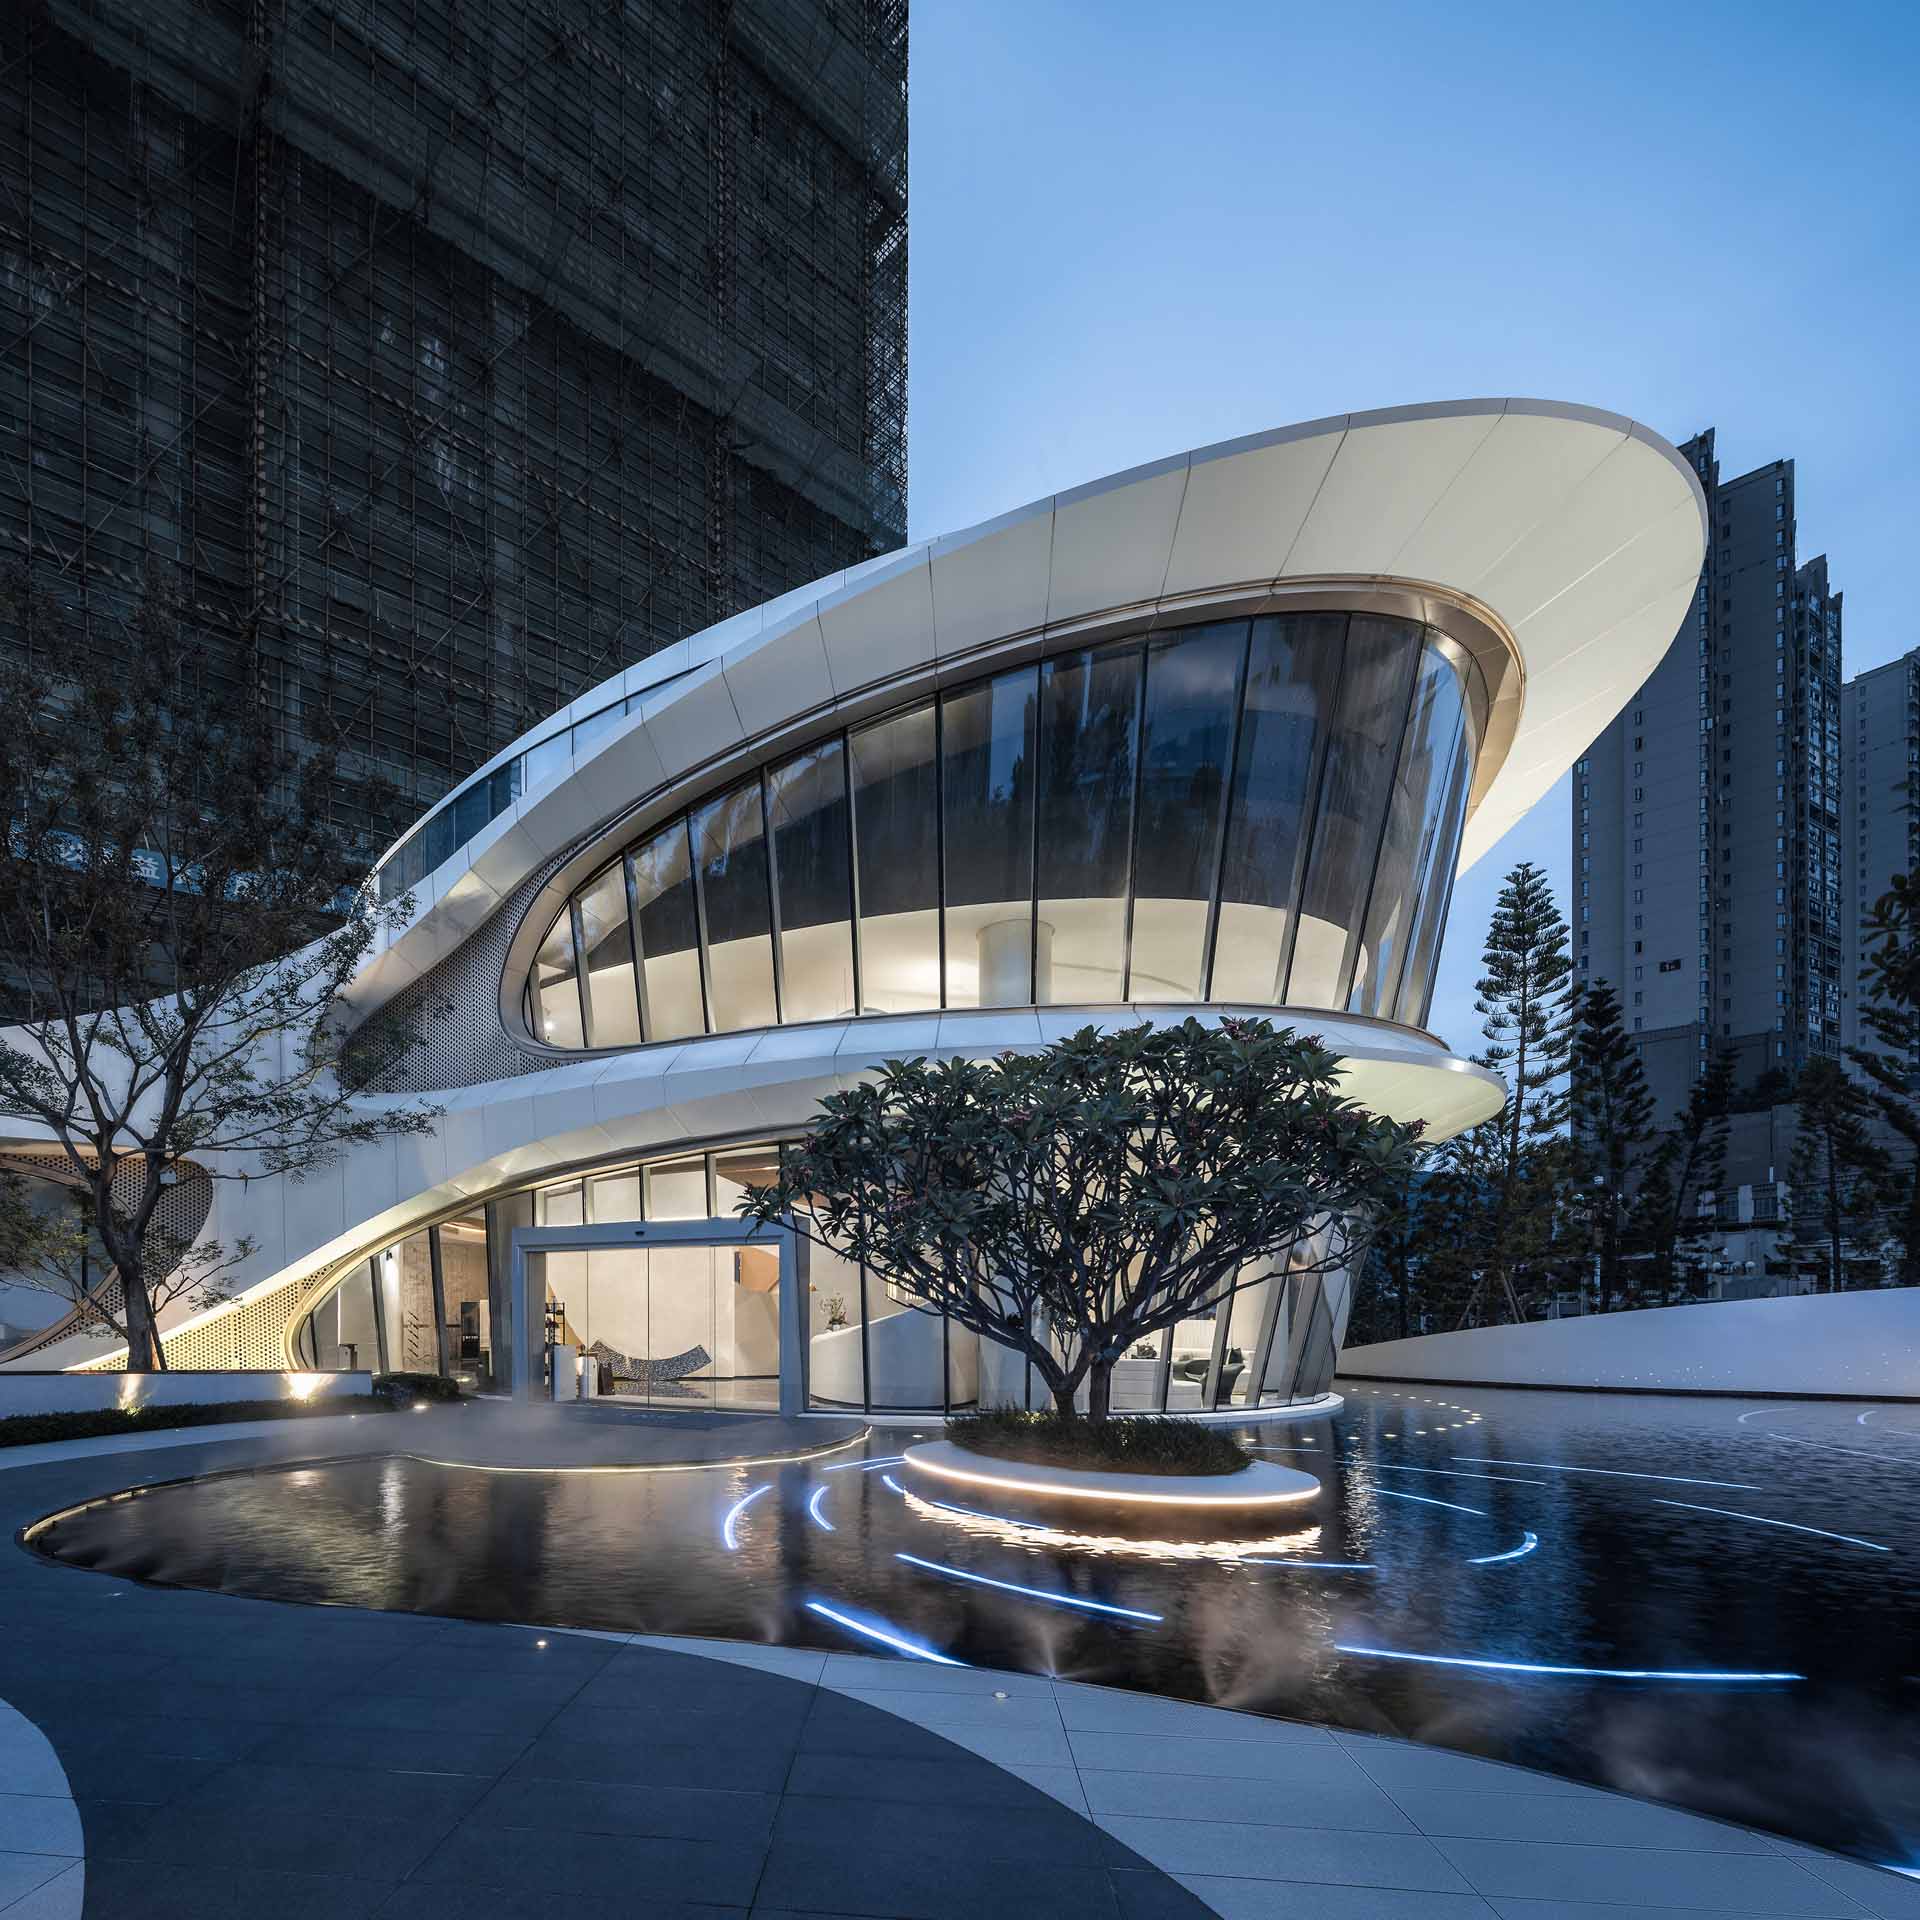 A community center whose exterior features silver-white aluminum plate and champagne gold perforated aluminum plate to simulate the flexible curve lines of the butterfly wings.